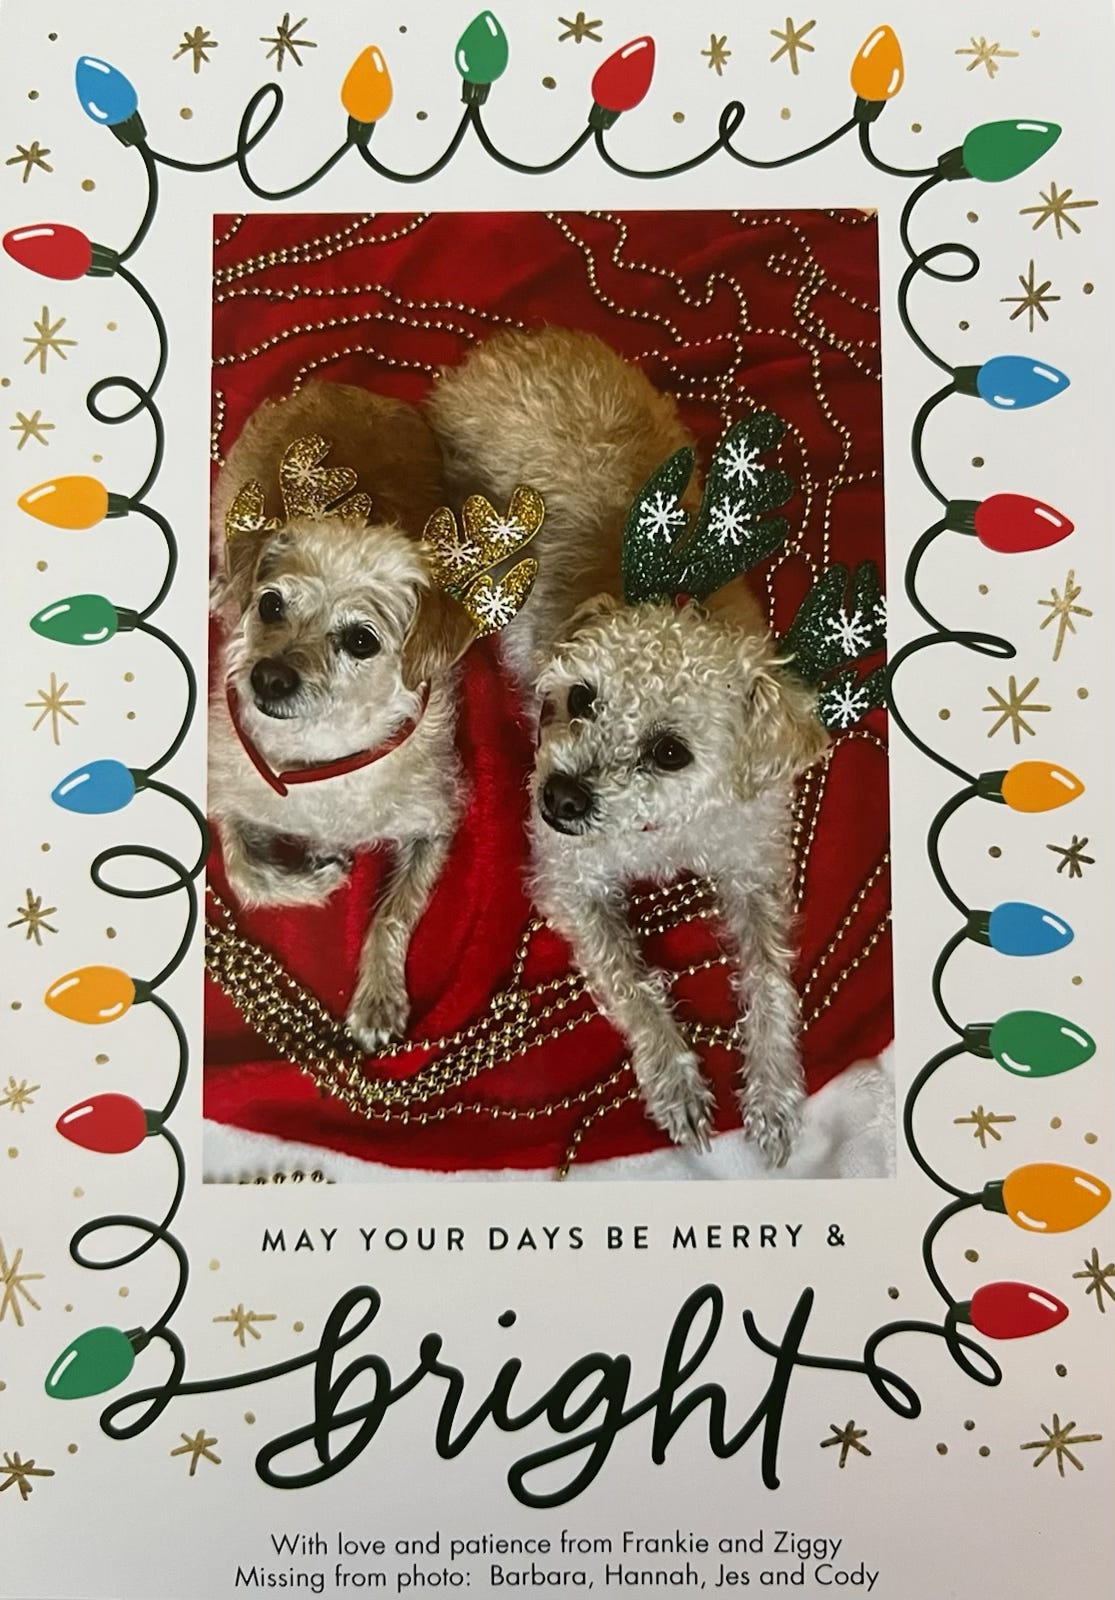 Holiday greeting card with 2 small dogs wearing Reindeer antlers, sitting on a red rug. 